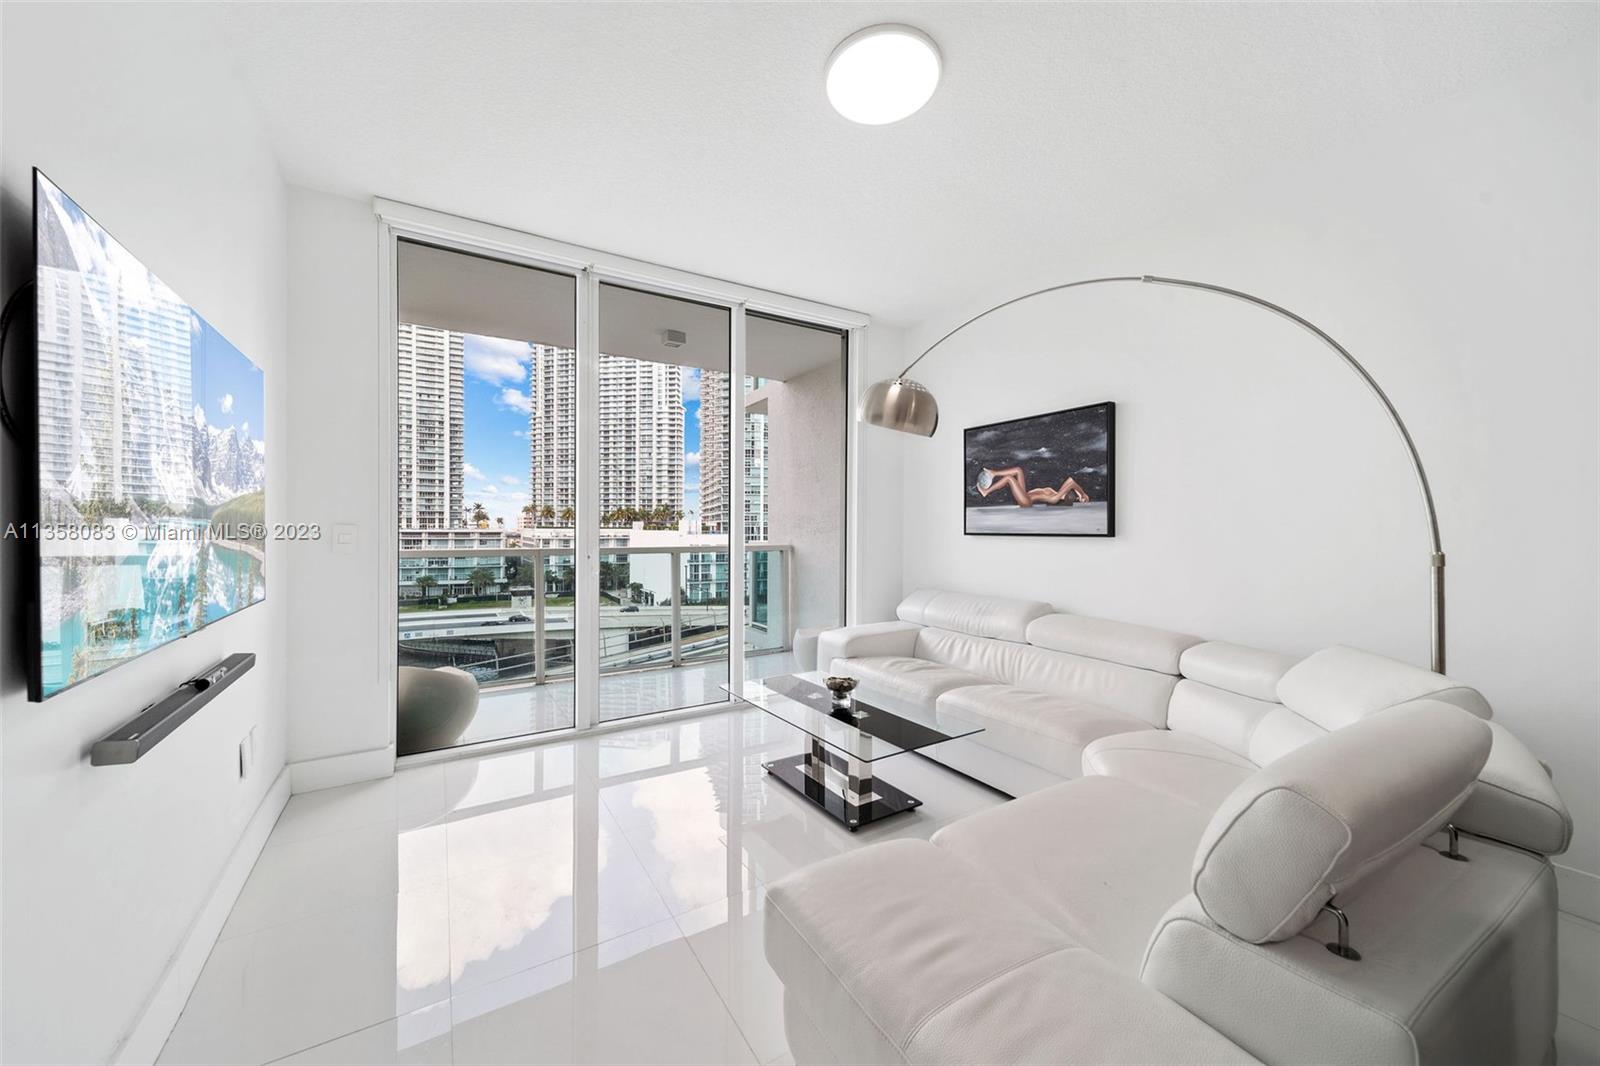 This stunning updated unit at Brickell on the River is ready to become your home. Brickell on the River is beautifully located on the Miami River, with pathways and courtyards that can be utilized by the unit owners, to enjoy the views and entertain. Two floor gym, two pools, that have beautiful city views, a Business center for those days you work from home. It truly is the best city life Miami has to offer; Located near expressways, the Metro Mover (which will take you through the city) and the beautiful Brickell City Centre. Unit is being offered Furnished and Unfurnished! Don't miss out on the opportunity!